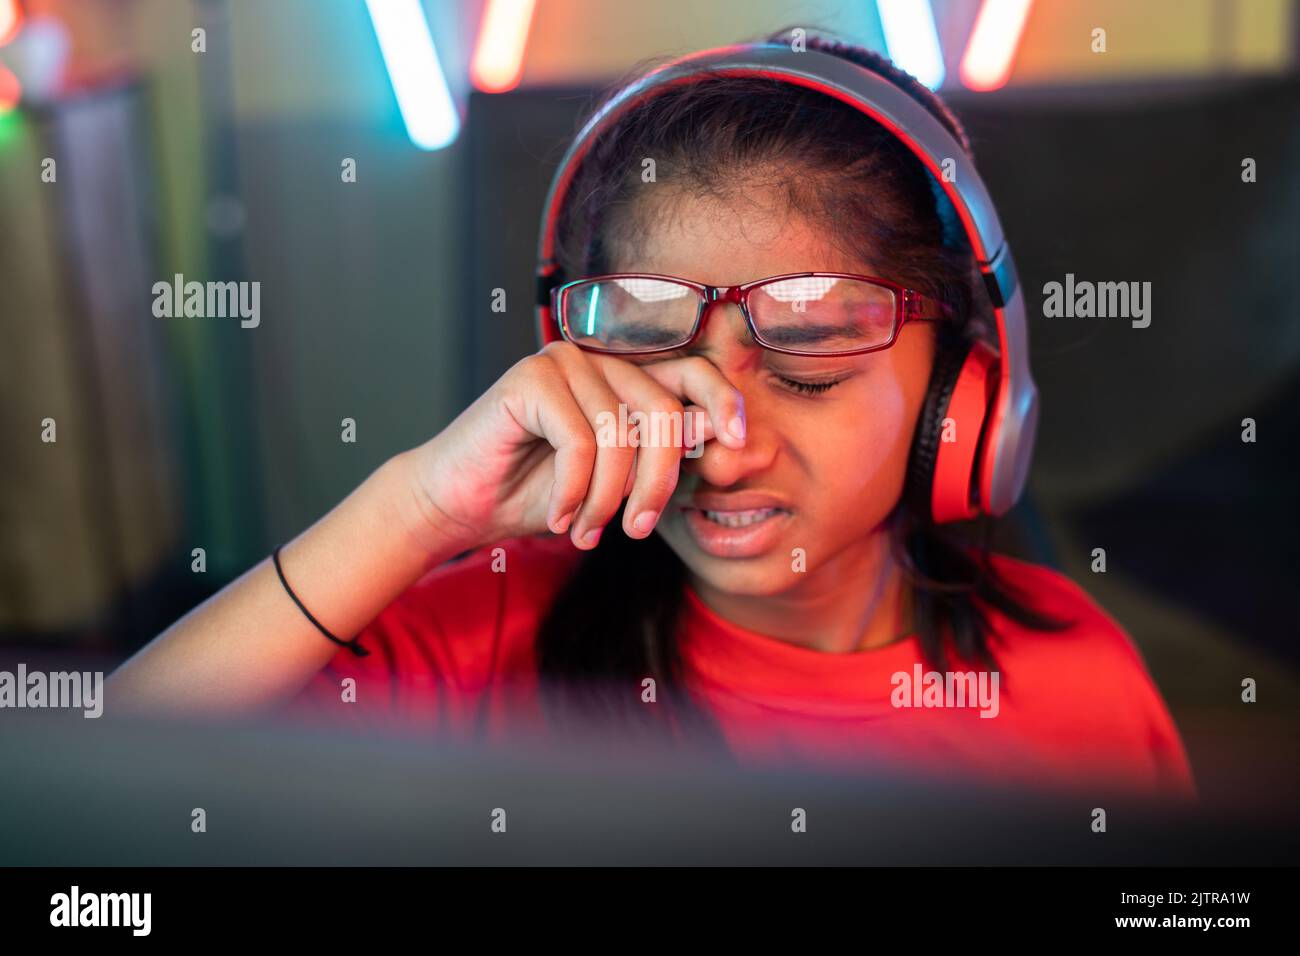 focus on hand, tired exhausted girl kid rubbing eyes by removing eyeglasses while playing online video game at home - concept of technology addiction Stock Photo